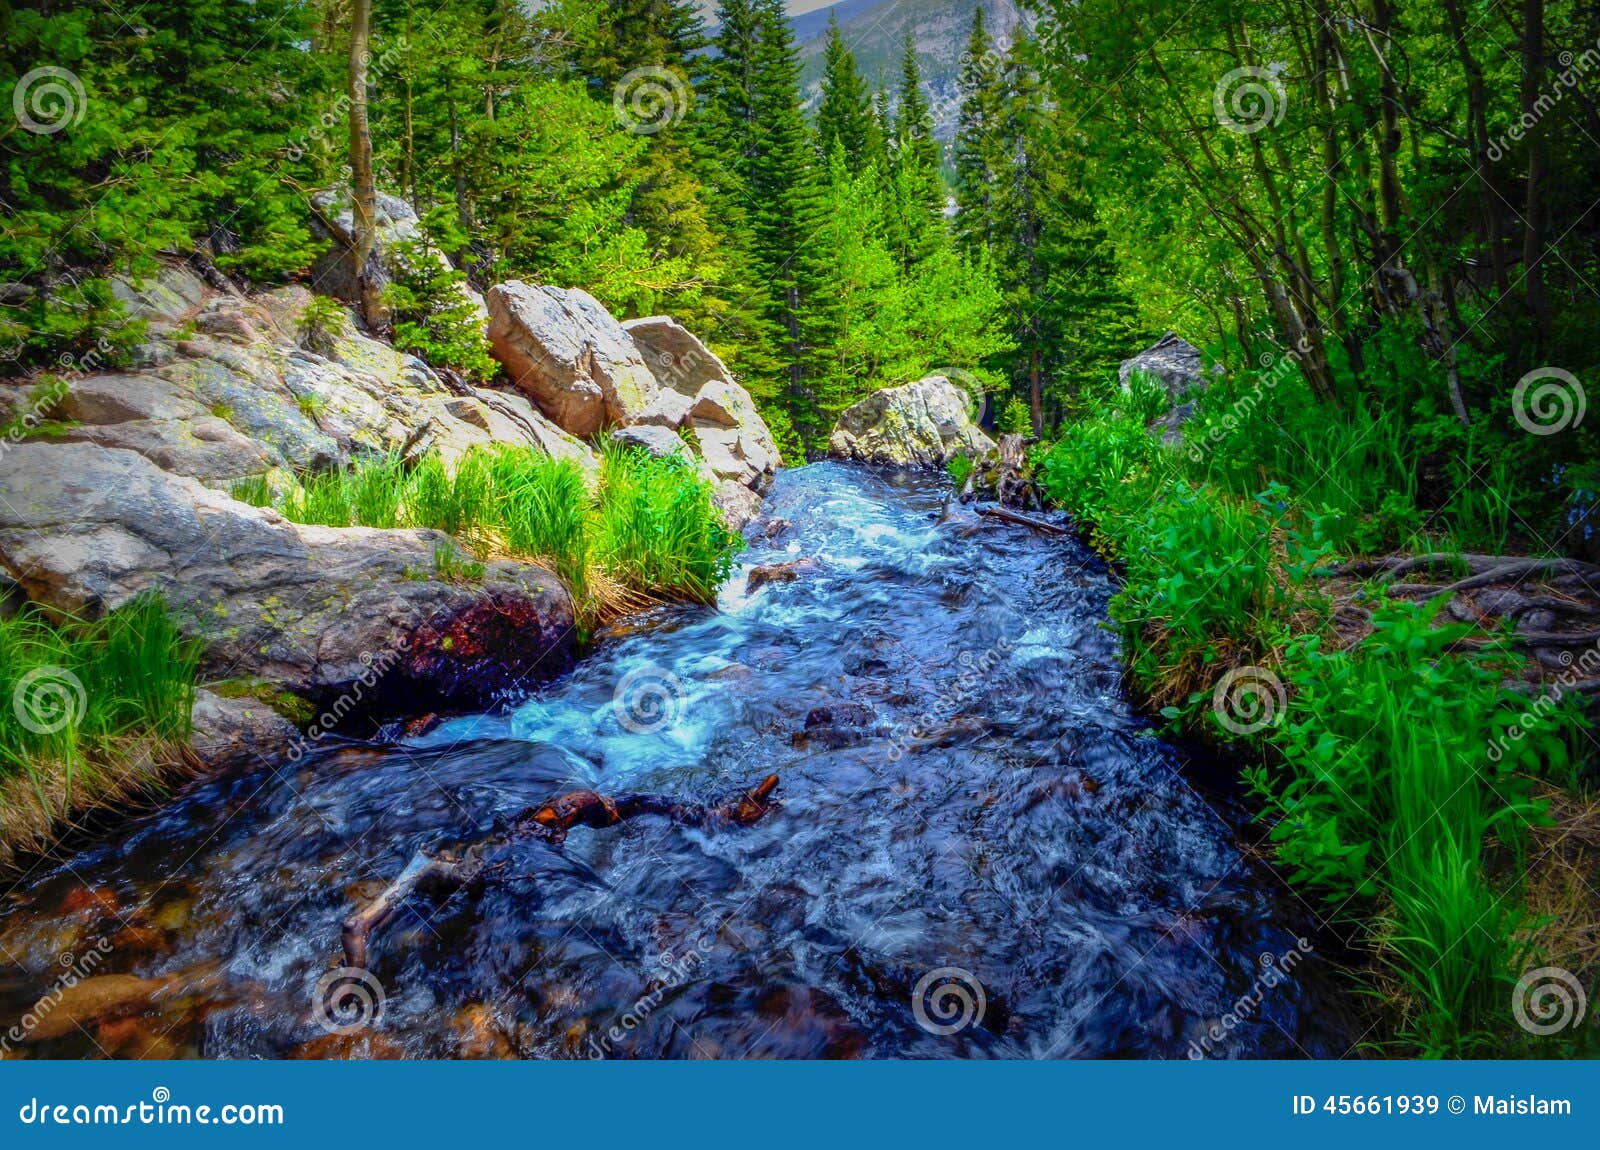 stream in rocky mountains